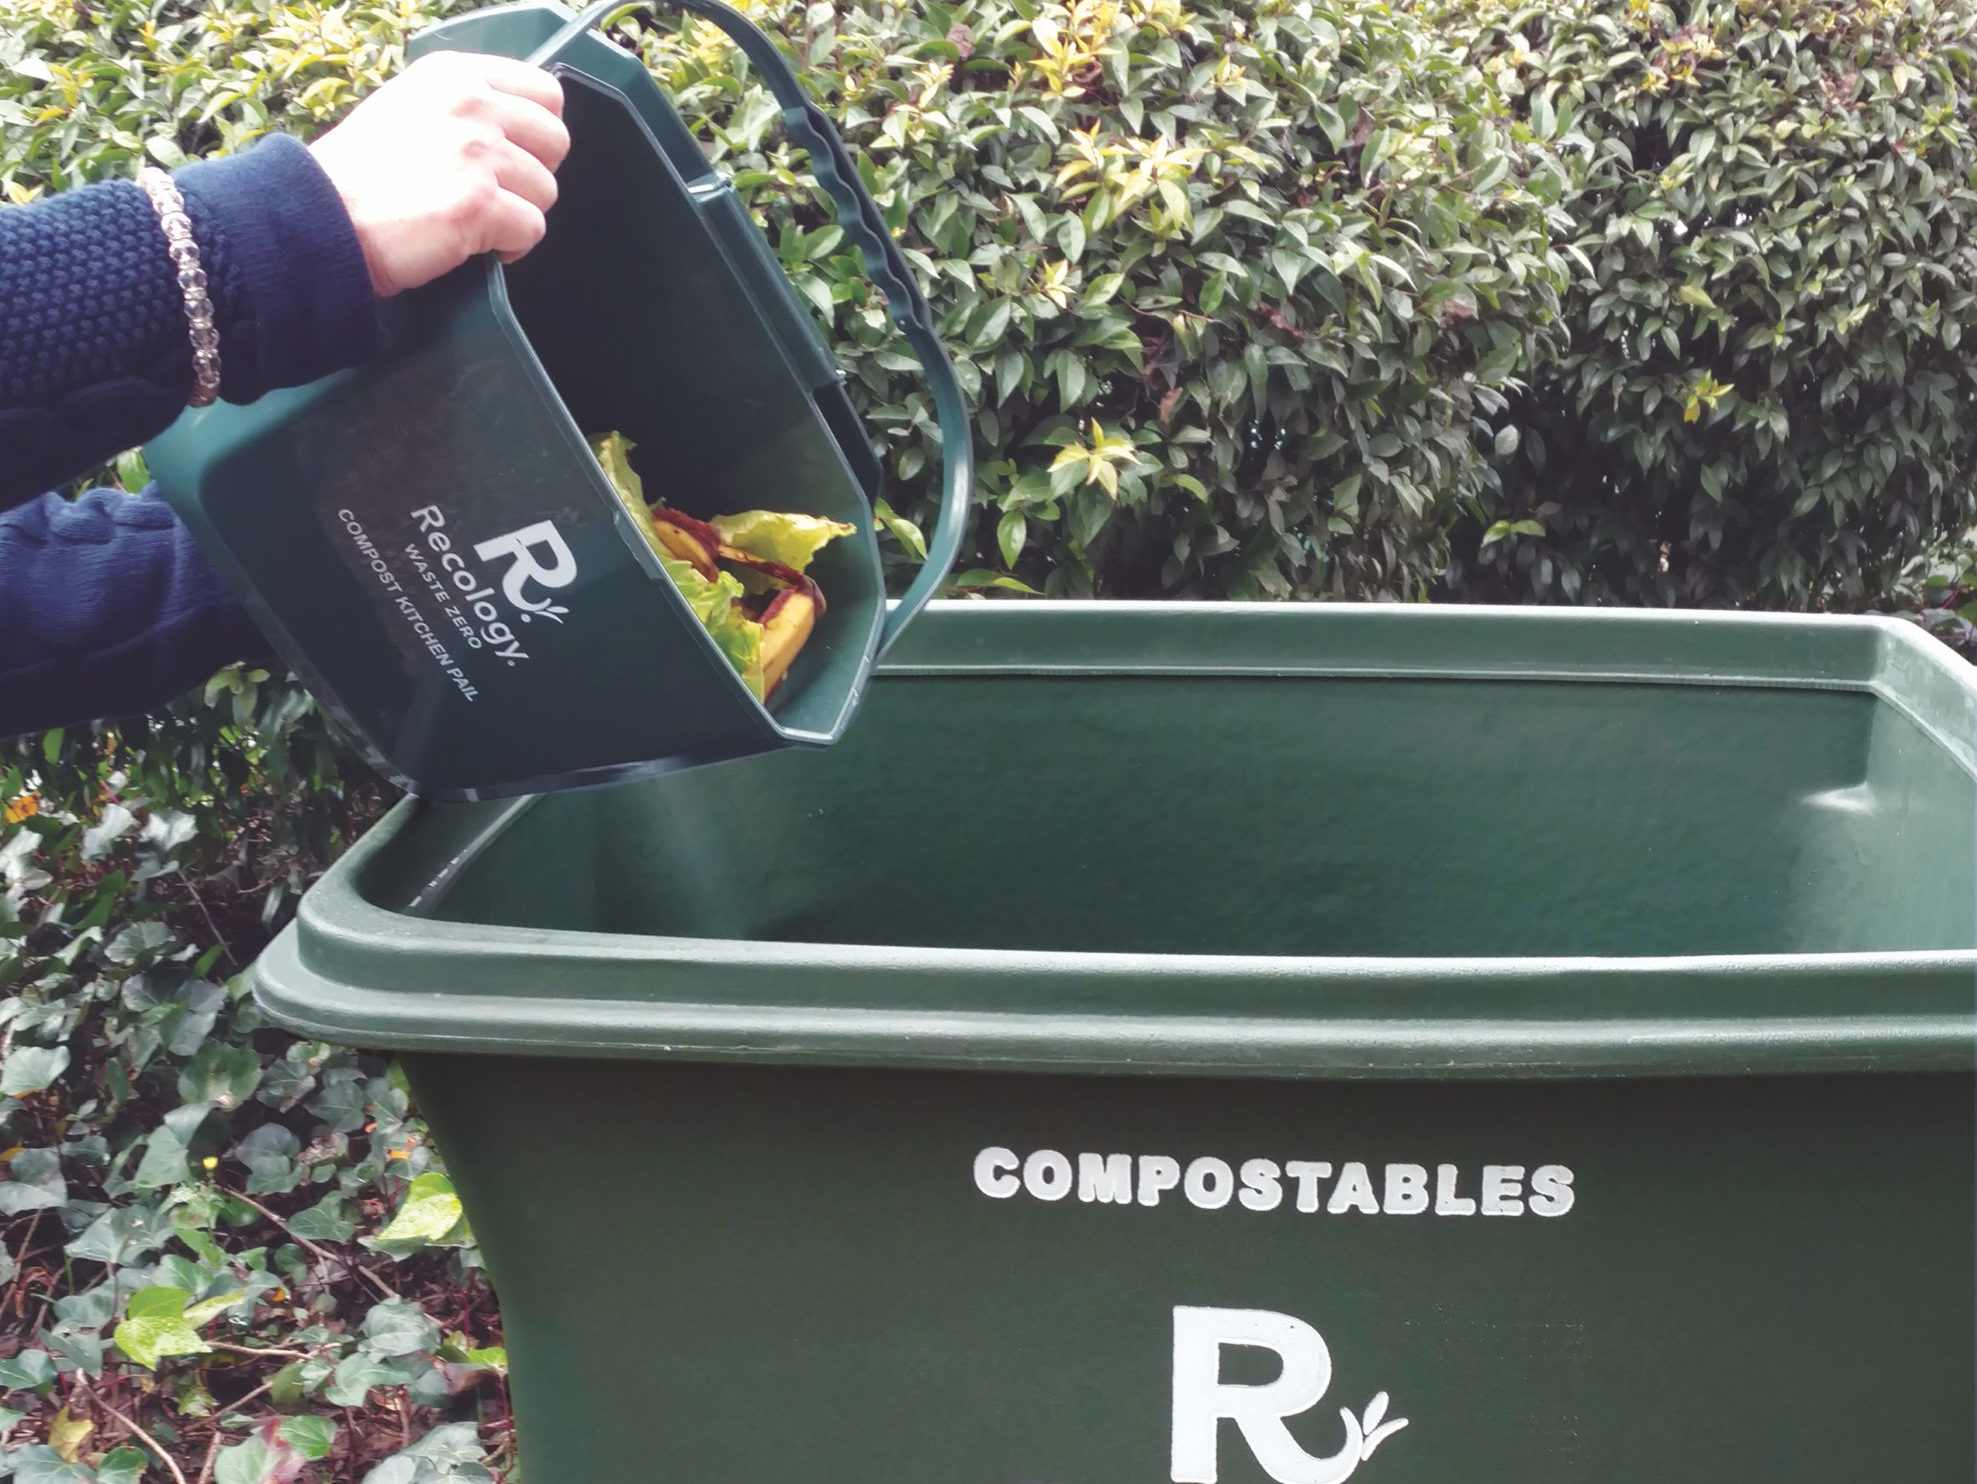 Compost it Sonoma! Free counter top pails now available to Sonoma residents  - City of Sonoma